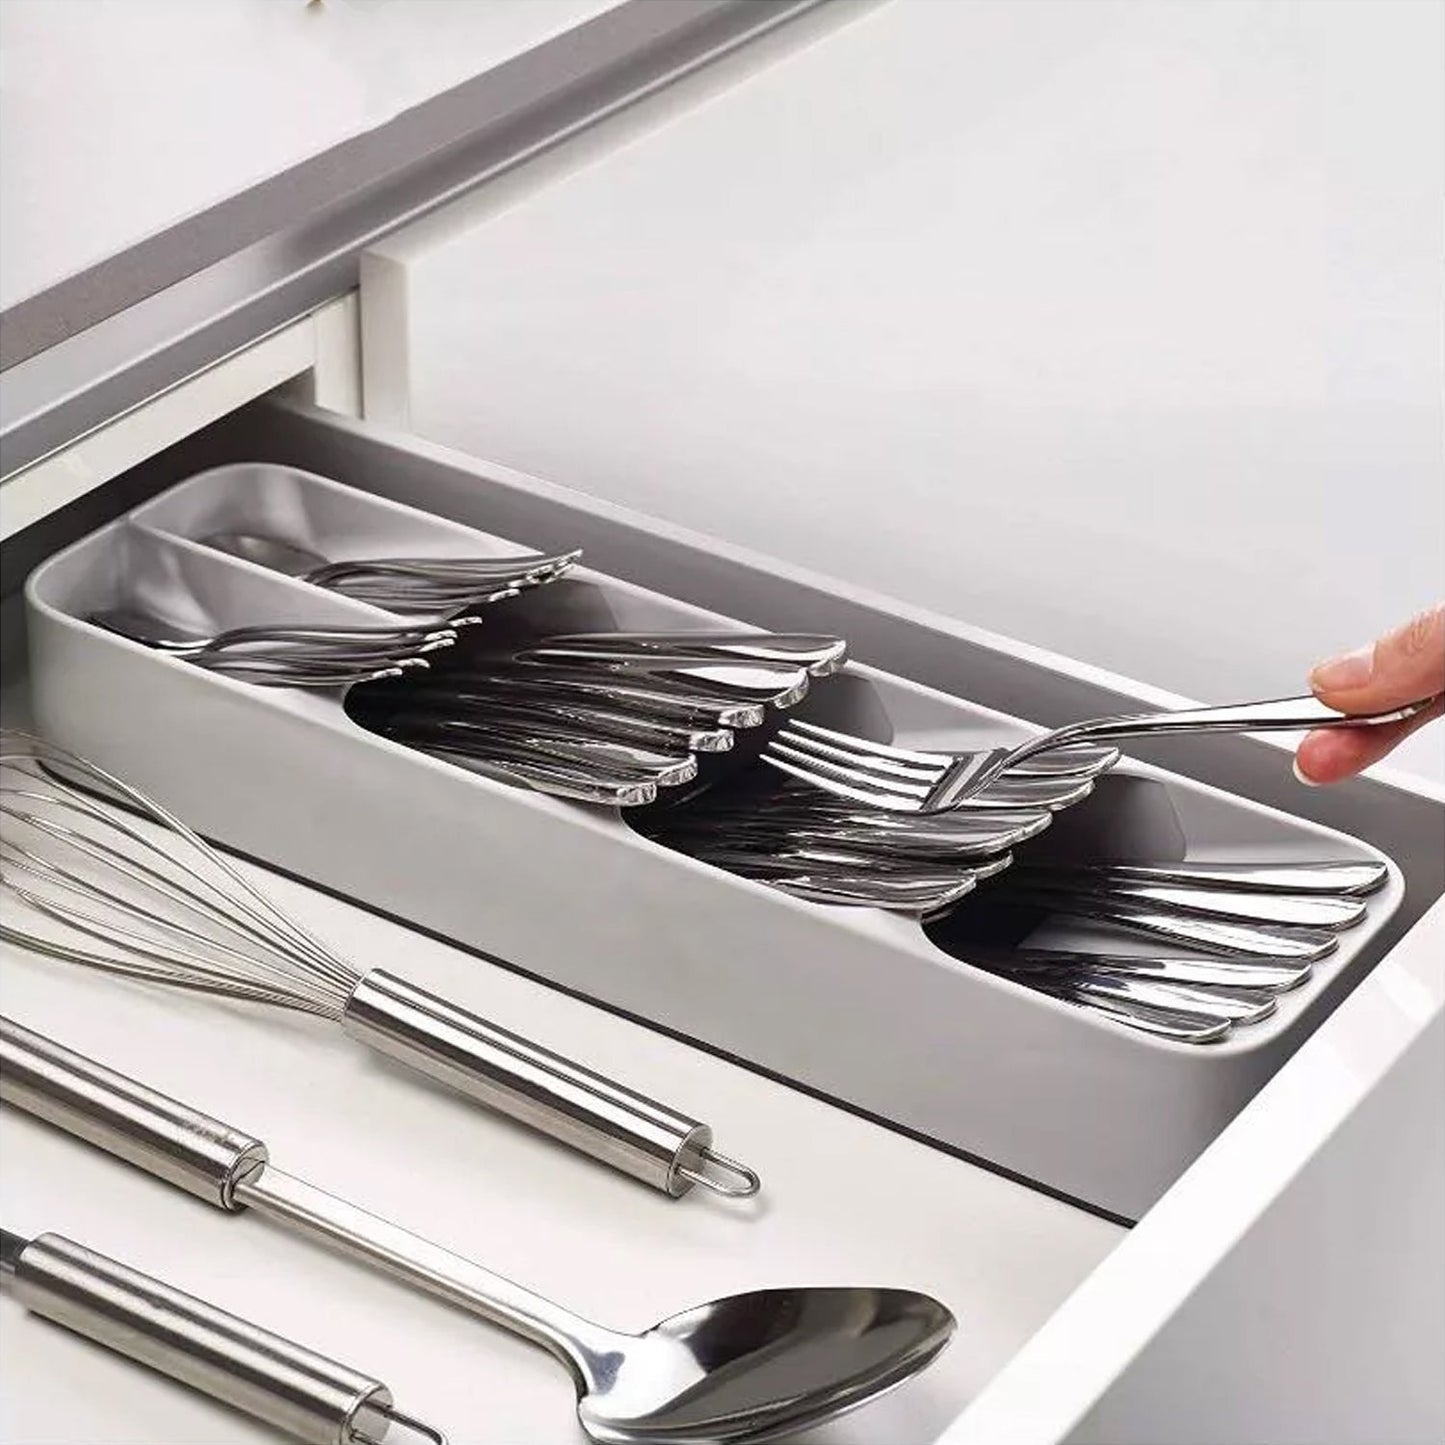 2762 1 Pc Cutlery Tray Box Used For Storing Cutlery Items And Stuffs Easily And Safely. DeoDap